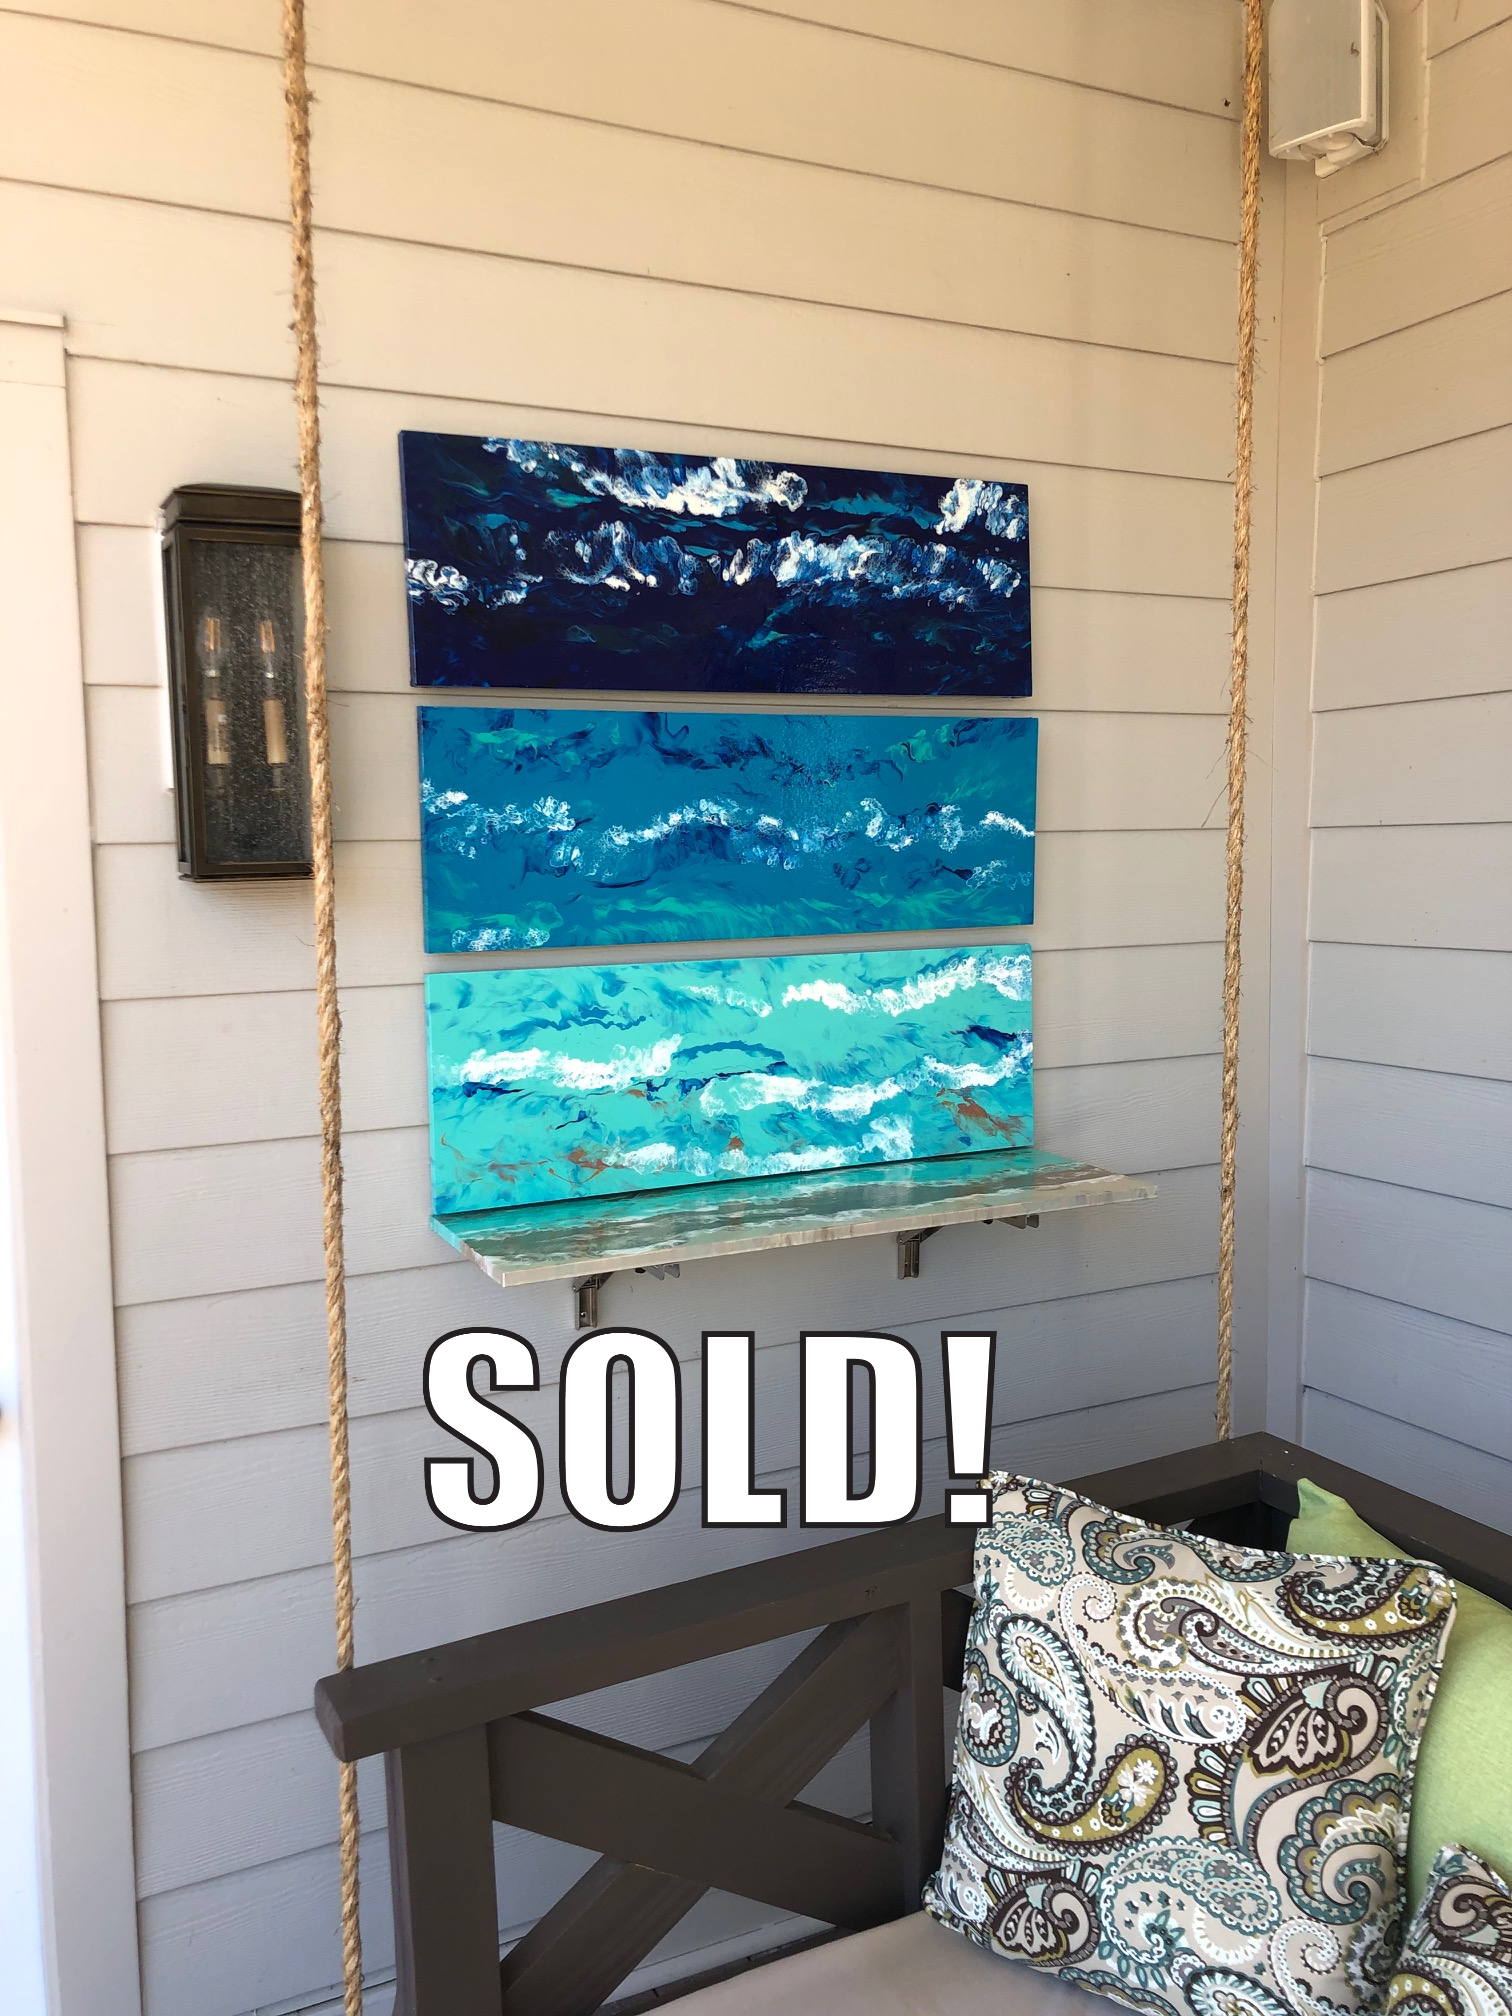 Commissioned Convertible Wall Art - SOLD!